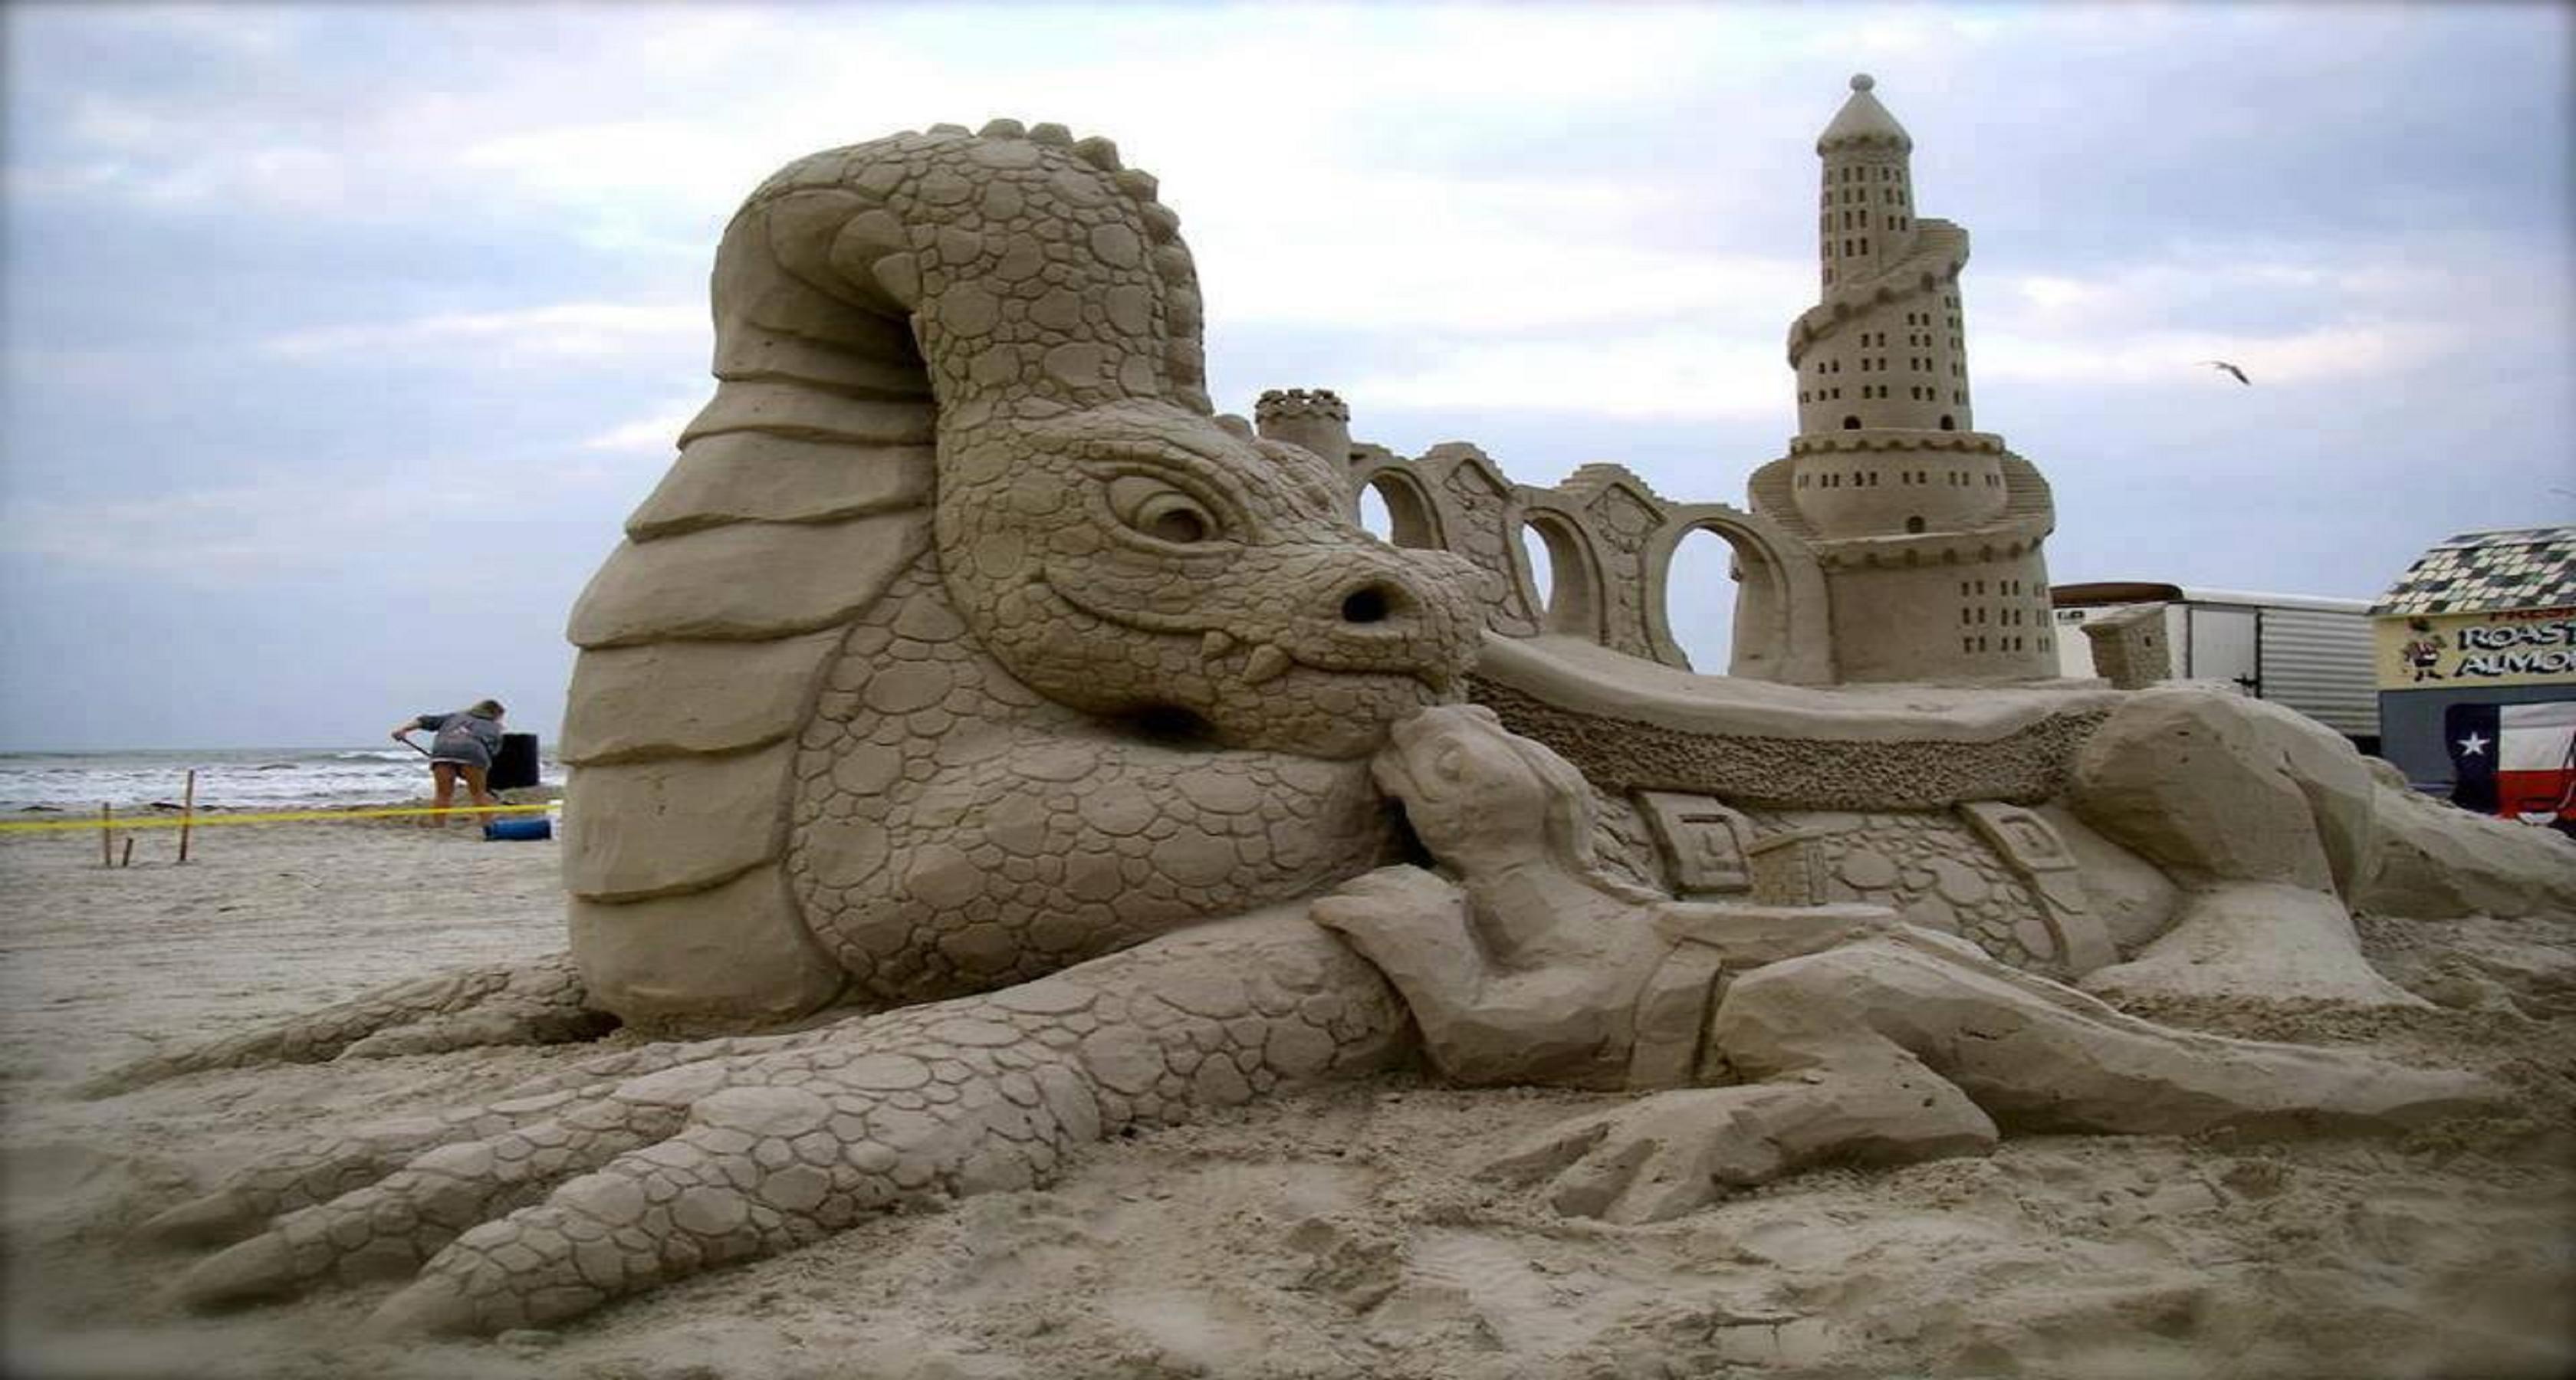 The sand castle   152533   High Quality and Resolution Wallpapers